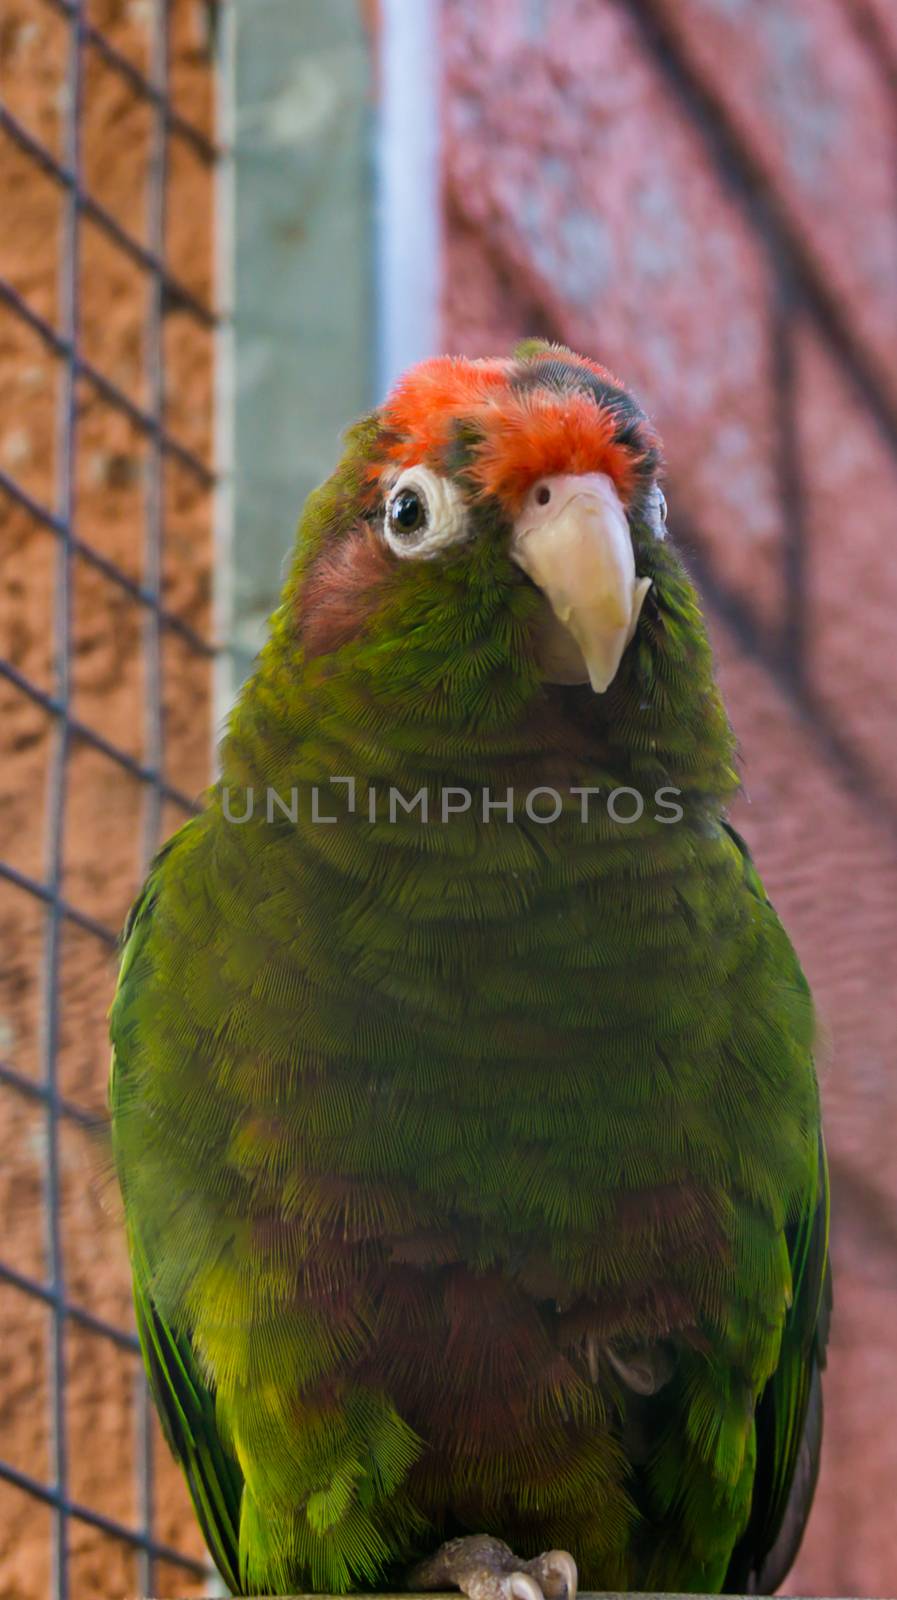 crimson fronted parakeet, a green tropical parrot with red head, from the forests of america by charlottebleijenberg